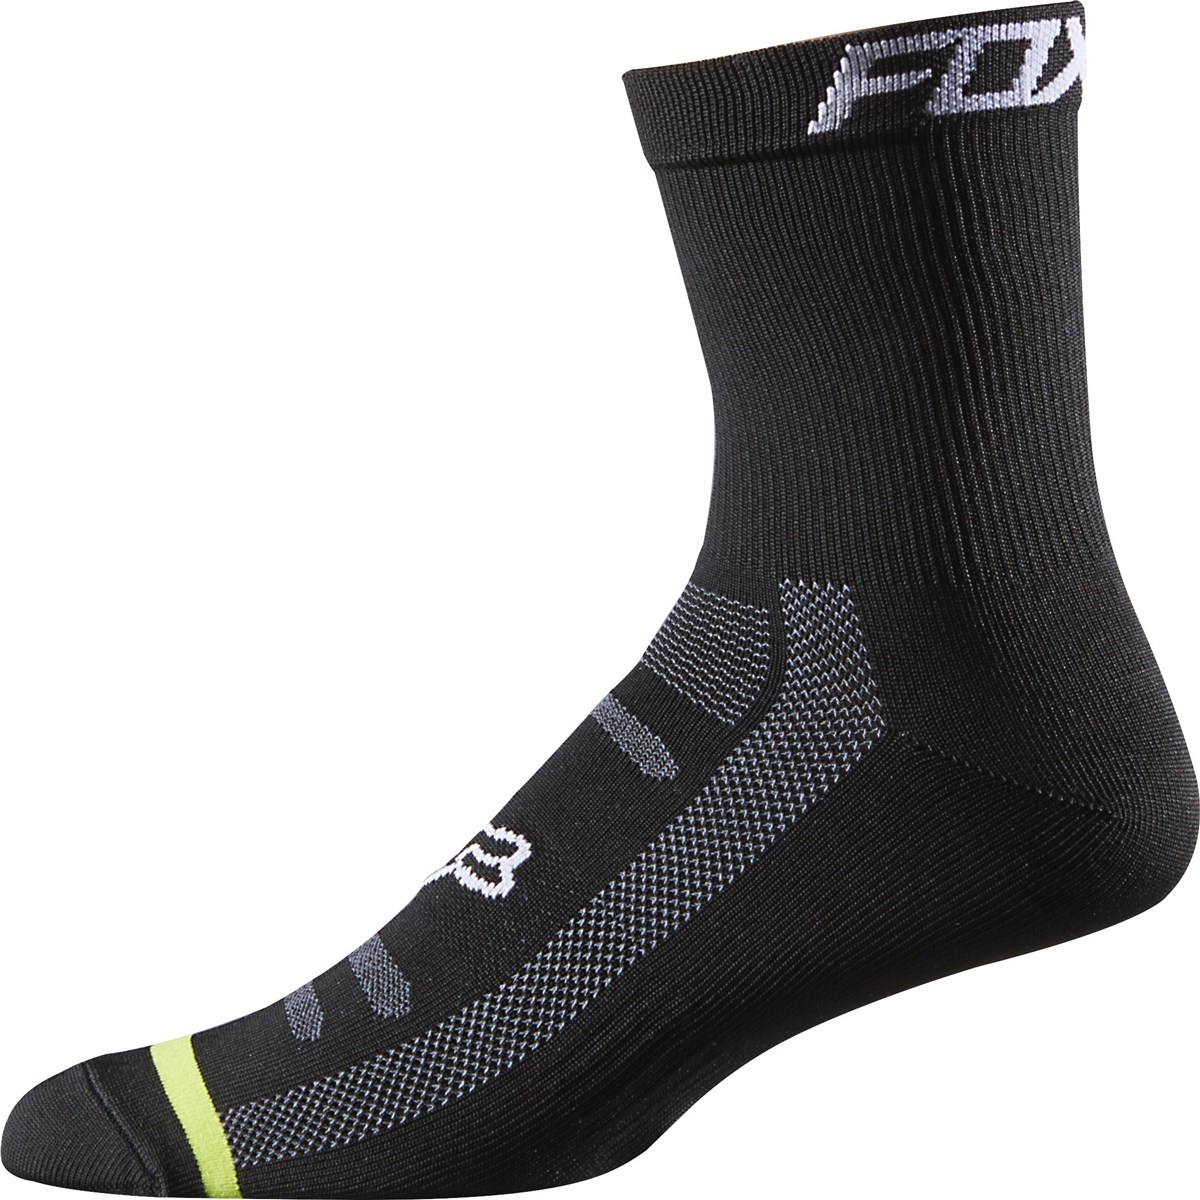 Fox Clothing DH Performance Cycling Socks AW16 product image